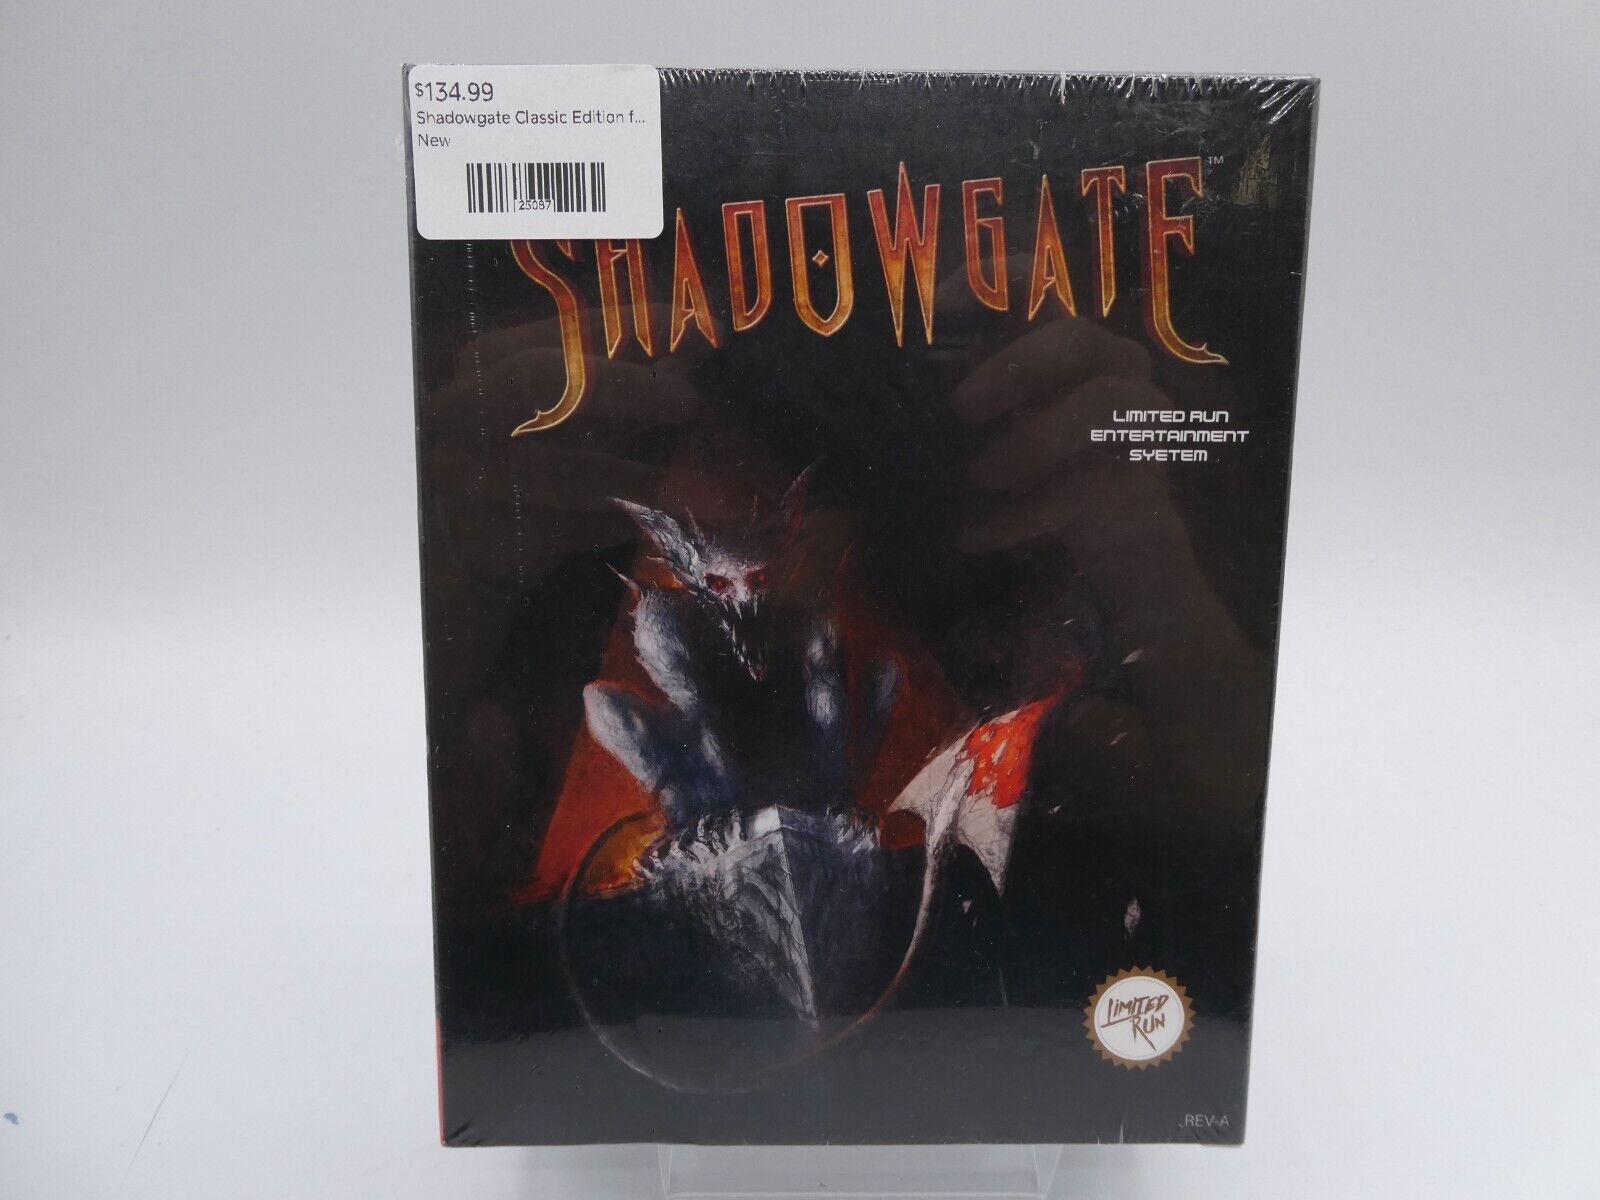 Glamorous Shadowgate Classic Edition Limited Run Sony PlayStation 4 PS4 New Factory Sealed on eBay